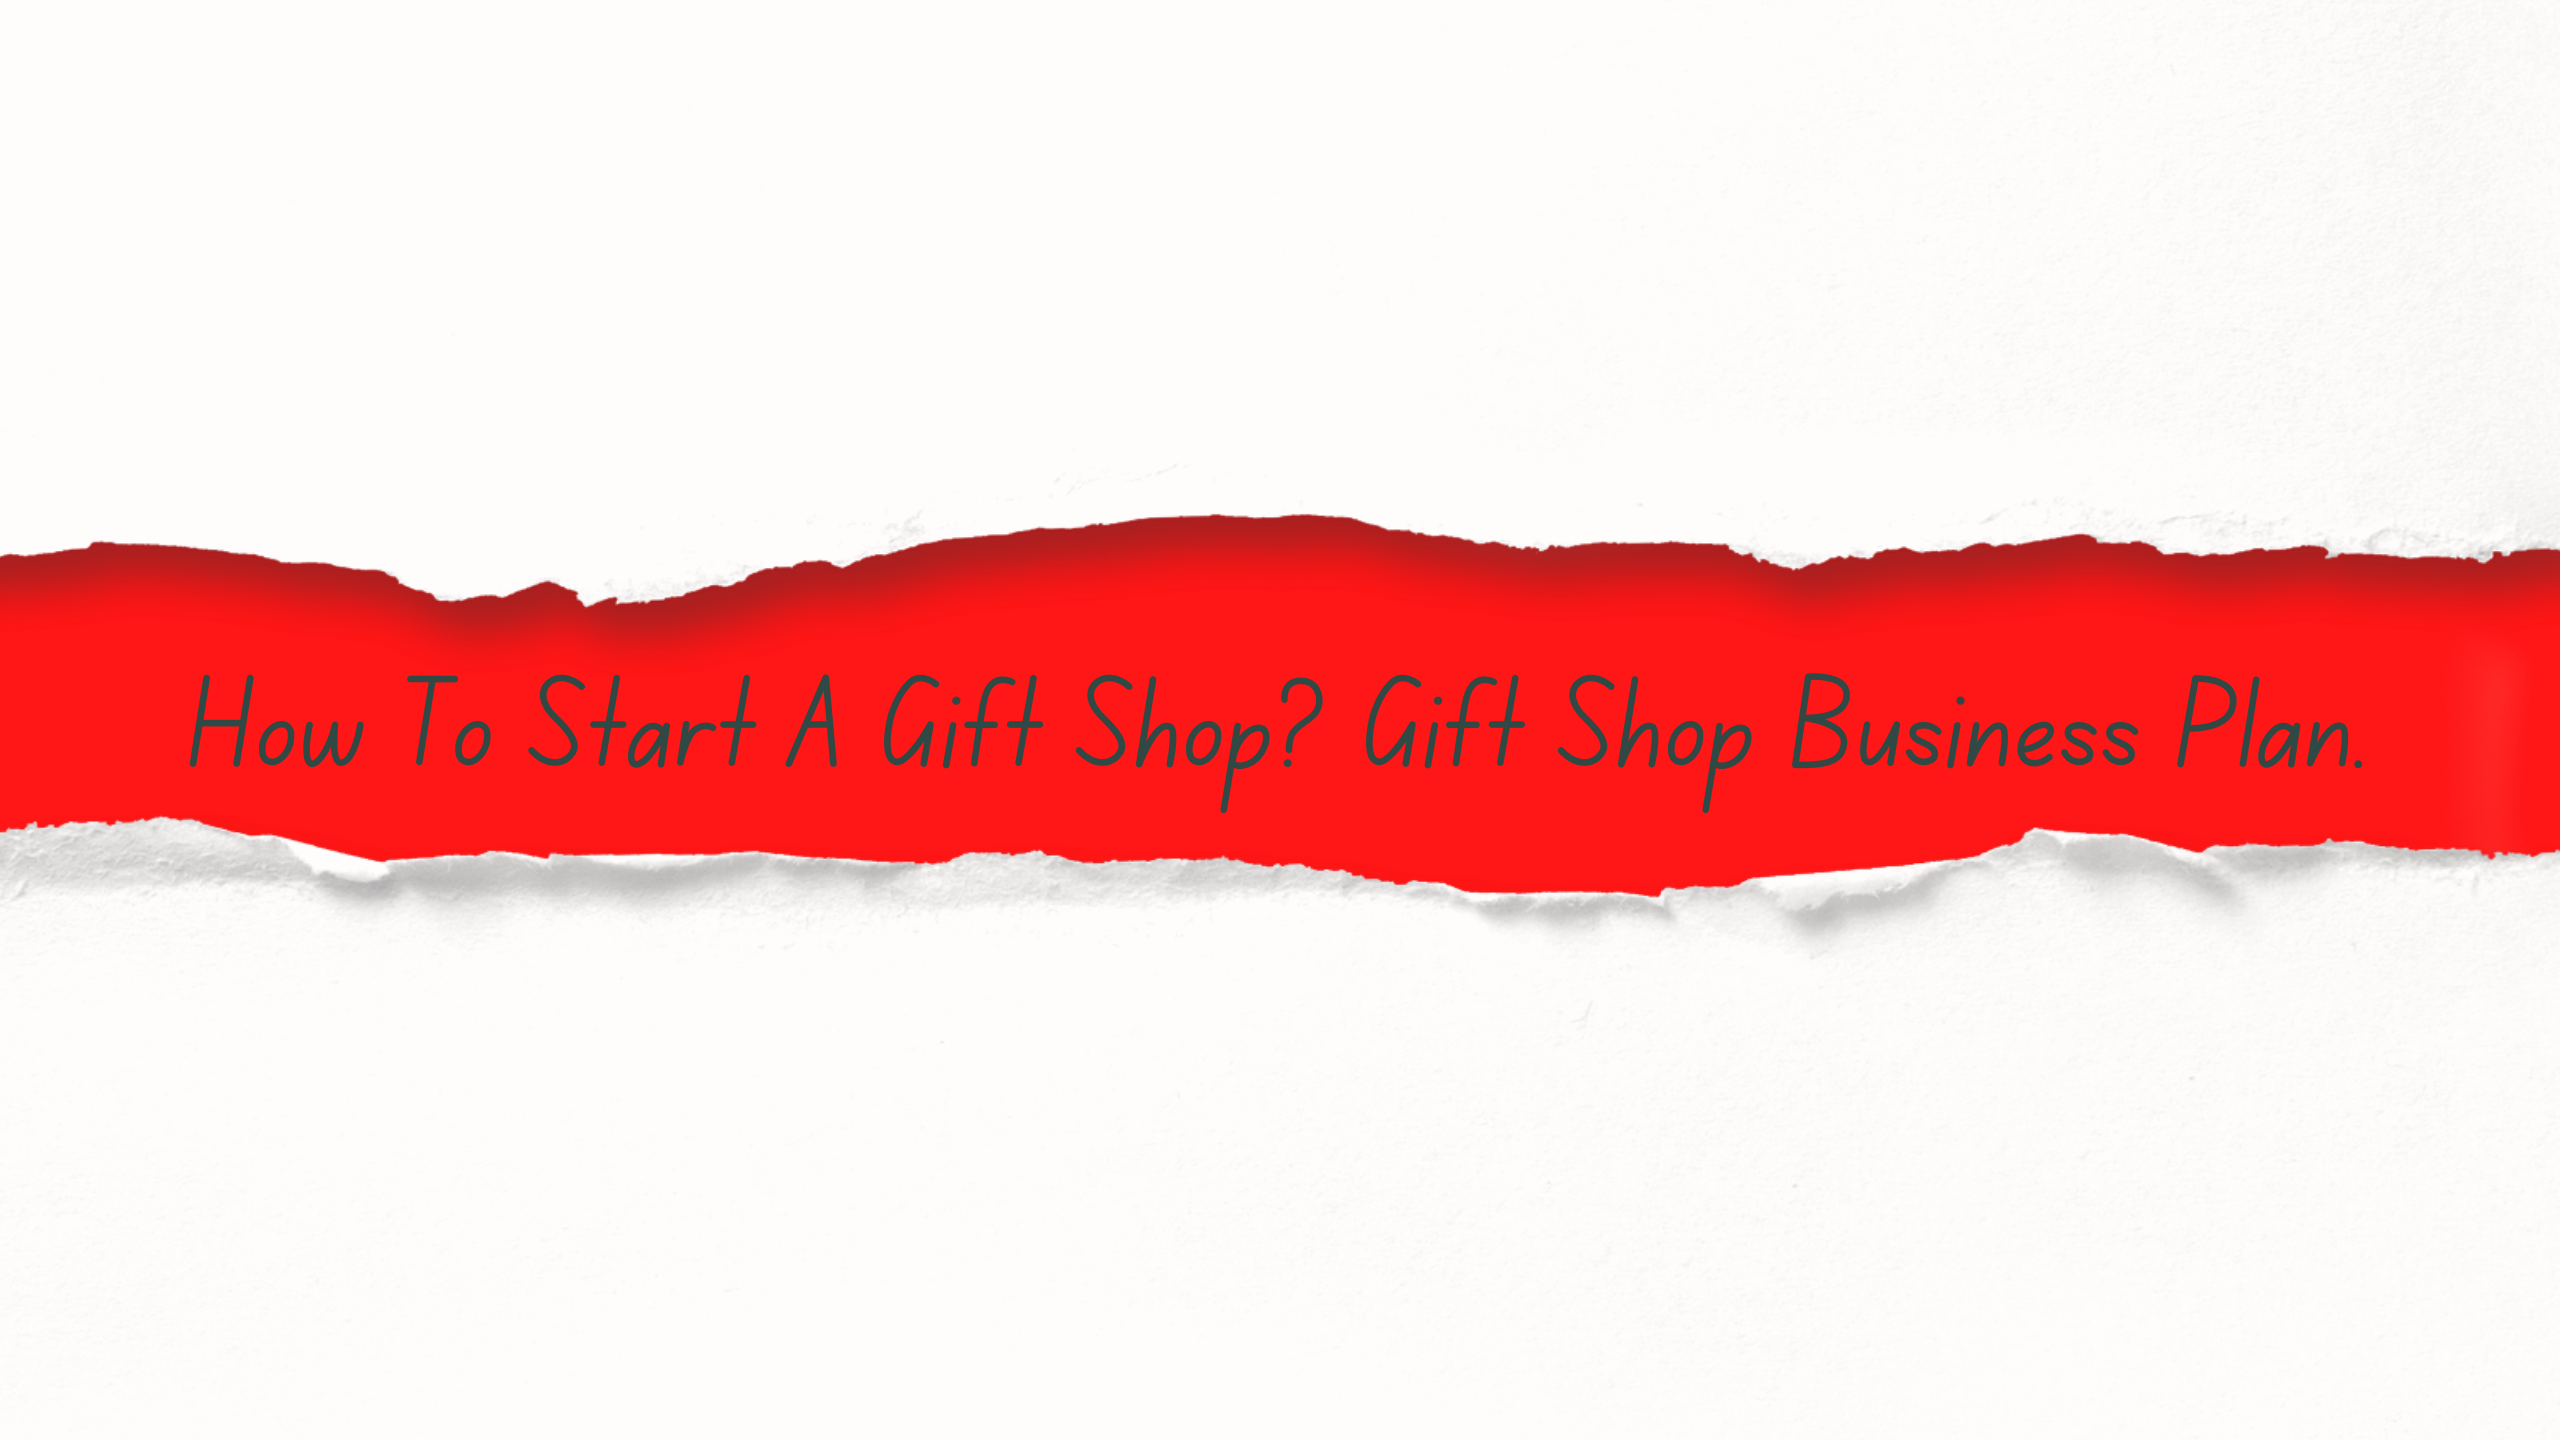 How To Start A Gift Shop? Gift Shop Business Plan.